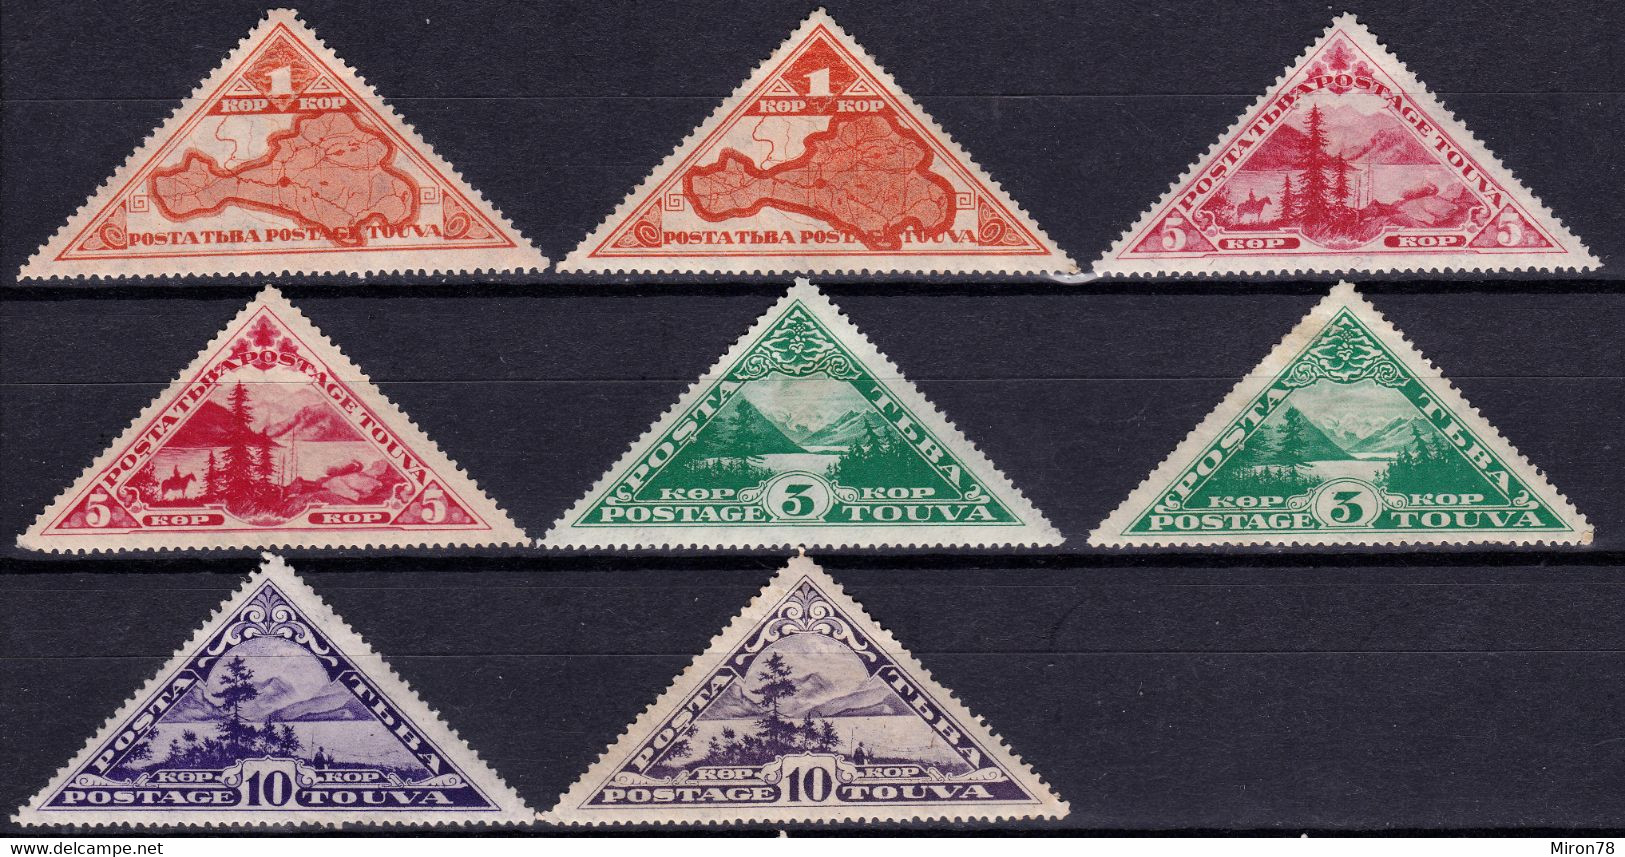 STAMPS TANNU TUVA 1935 MINT MH LOT#25 - Touva